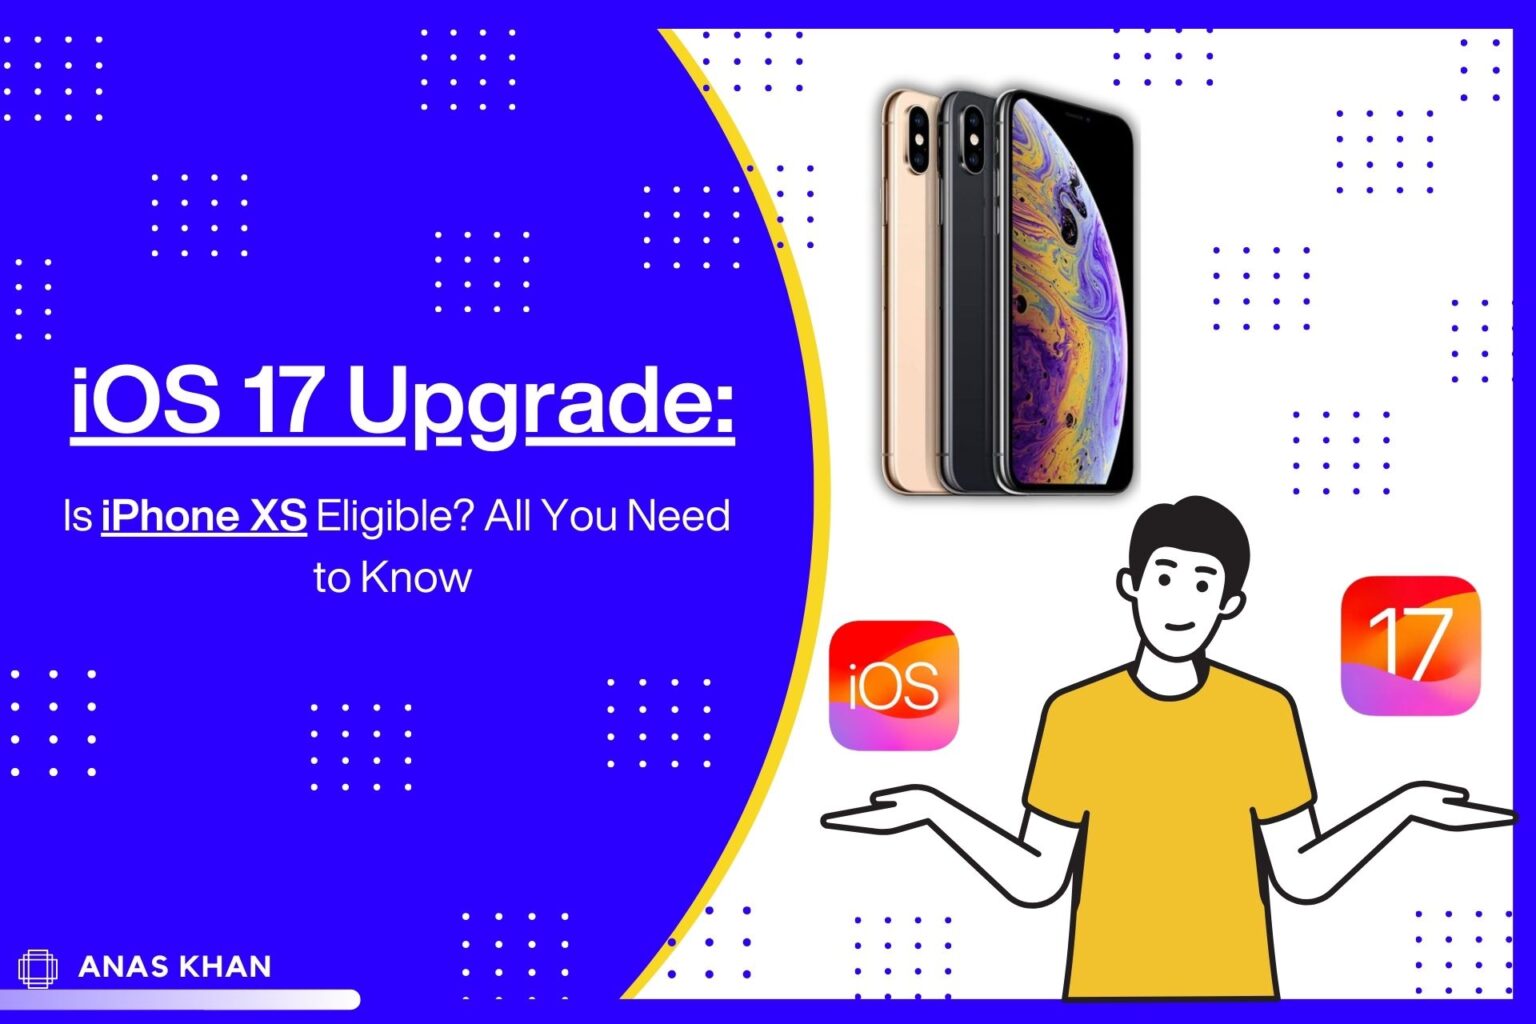 iOS 17 Upgrade: Is iPhone XS Eligible? All You Need to Know